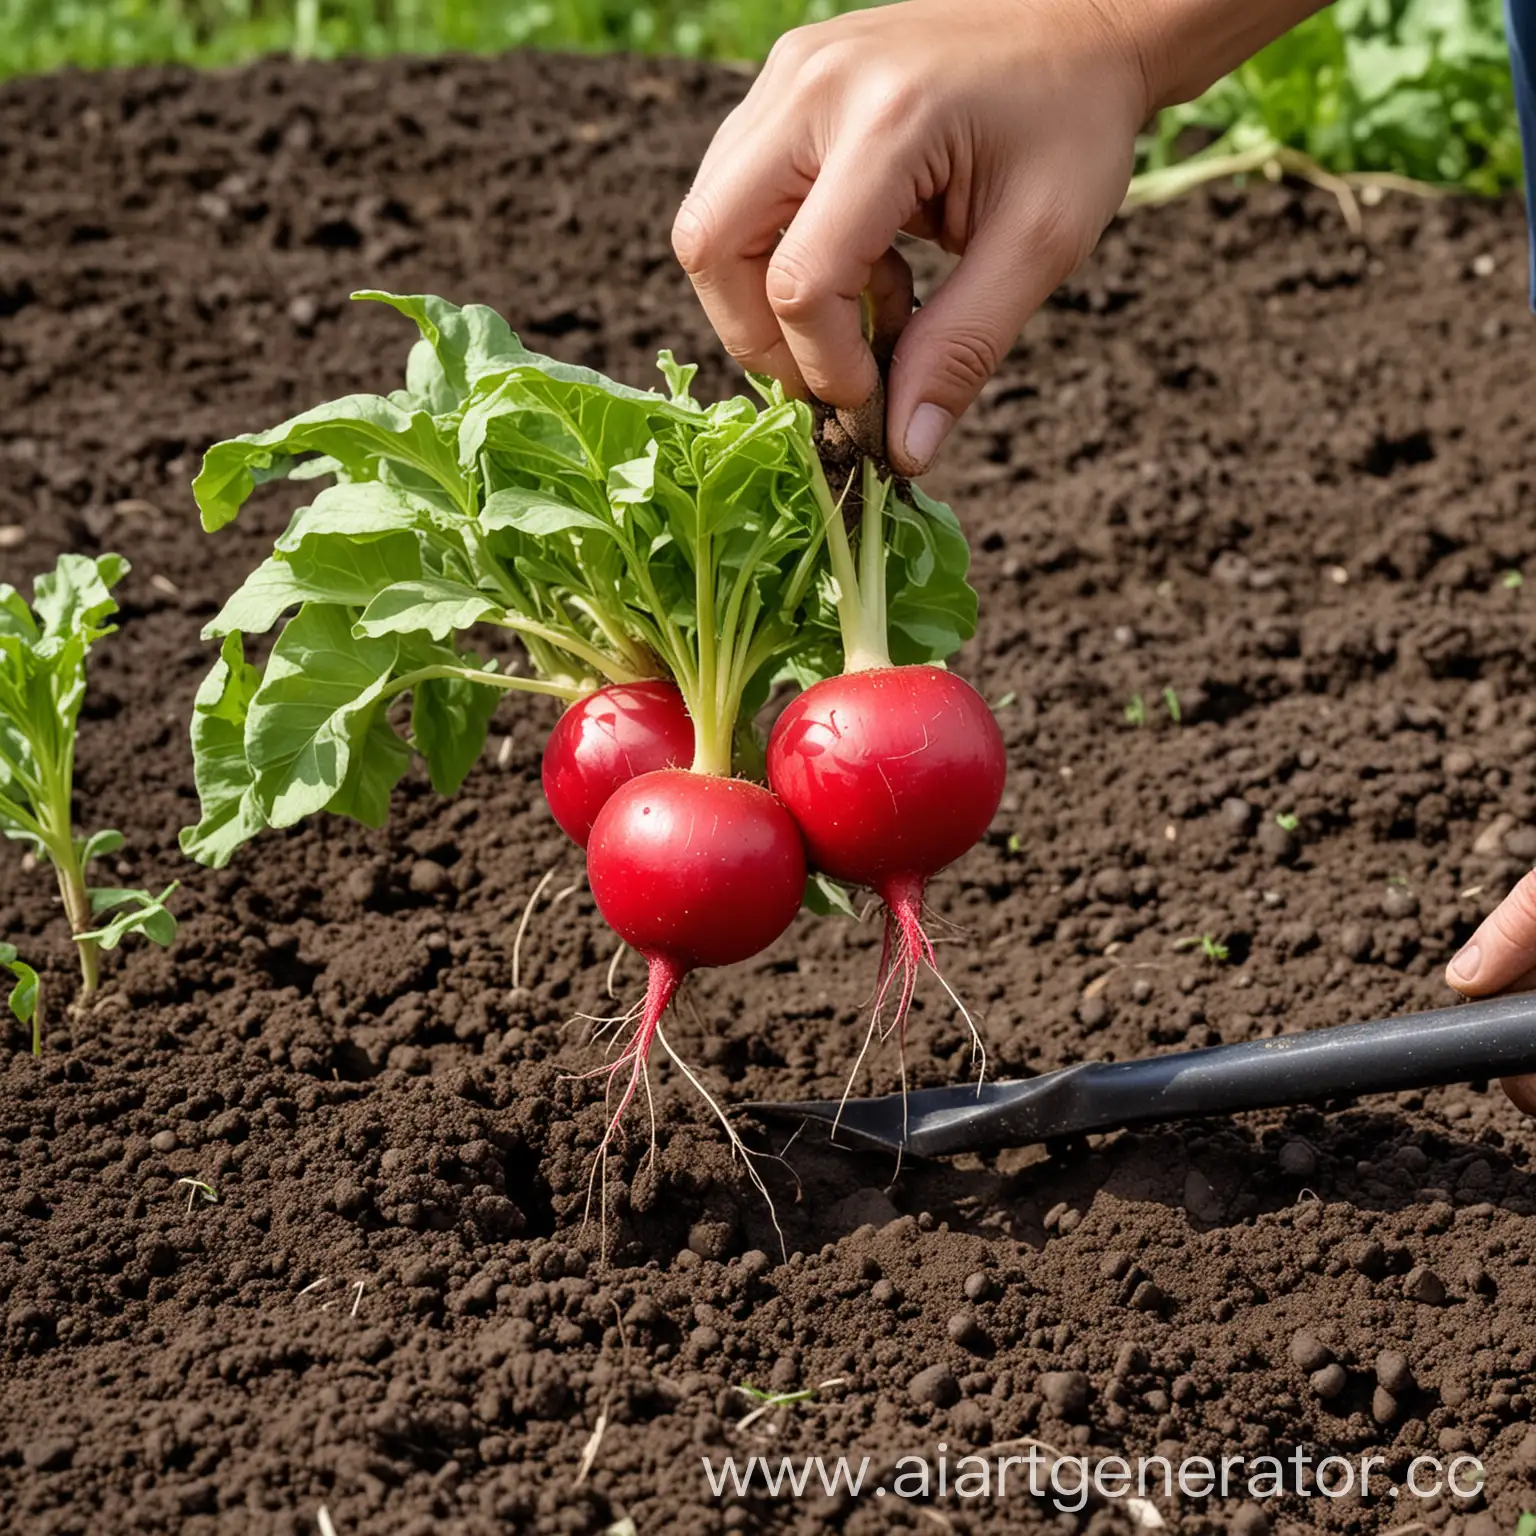 Harvesting-Radishes-in-the-Garden-with-a-Shovel